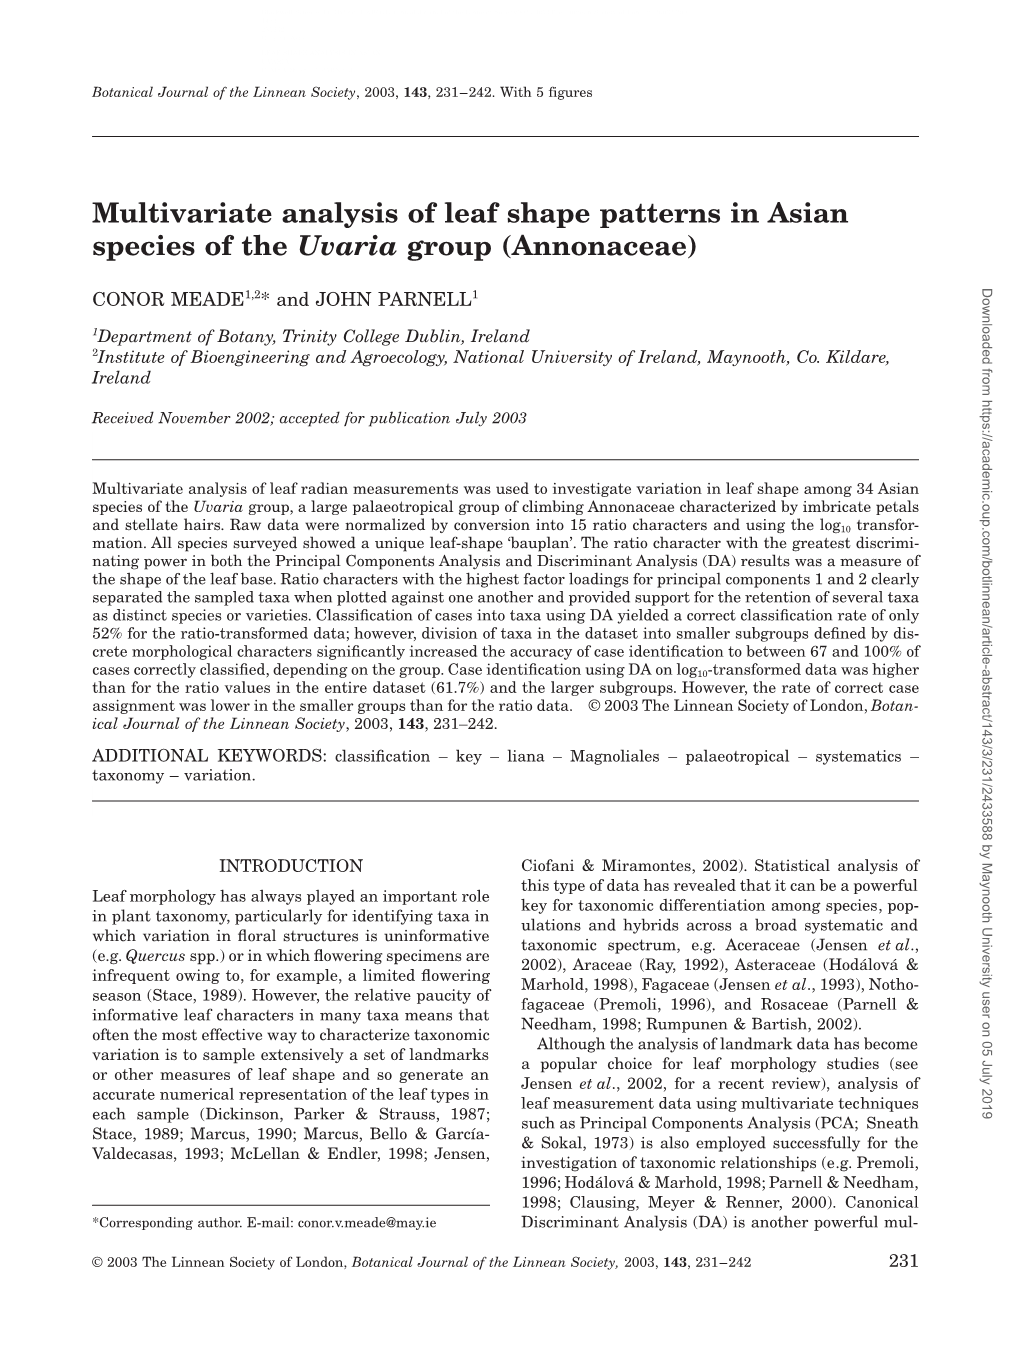 Multivariate Analysis of Leaf Shape Patterns in Asian Species of The